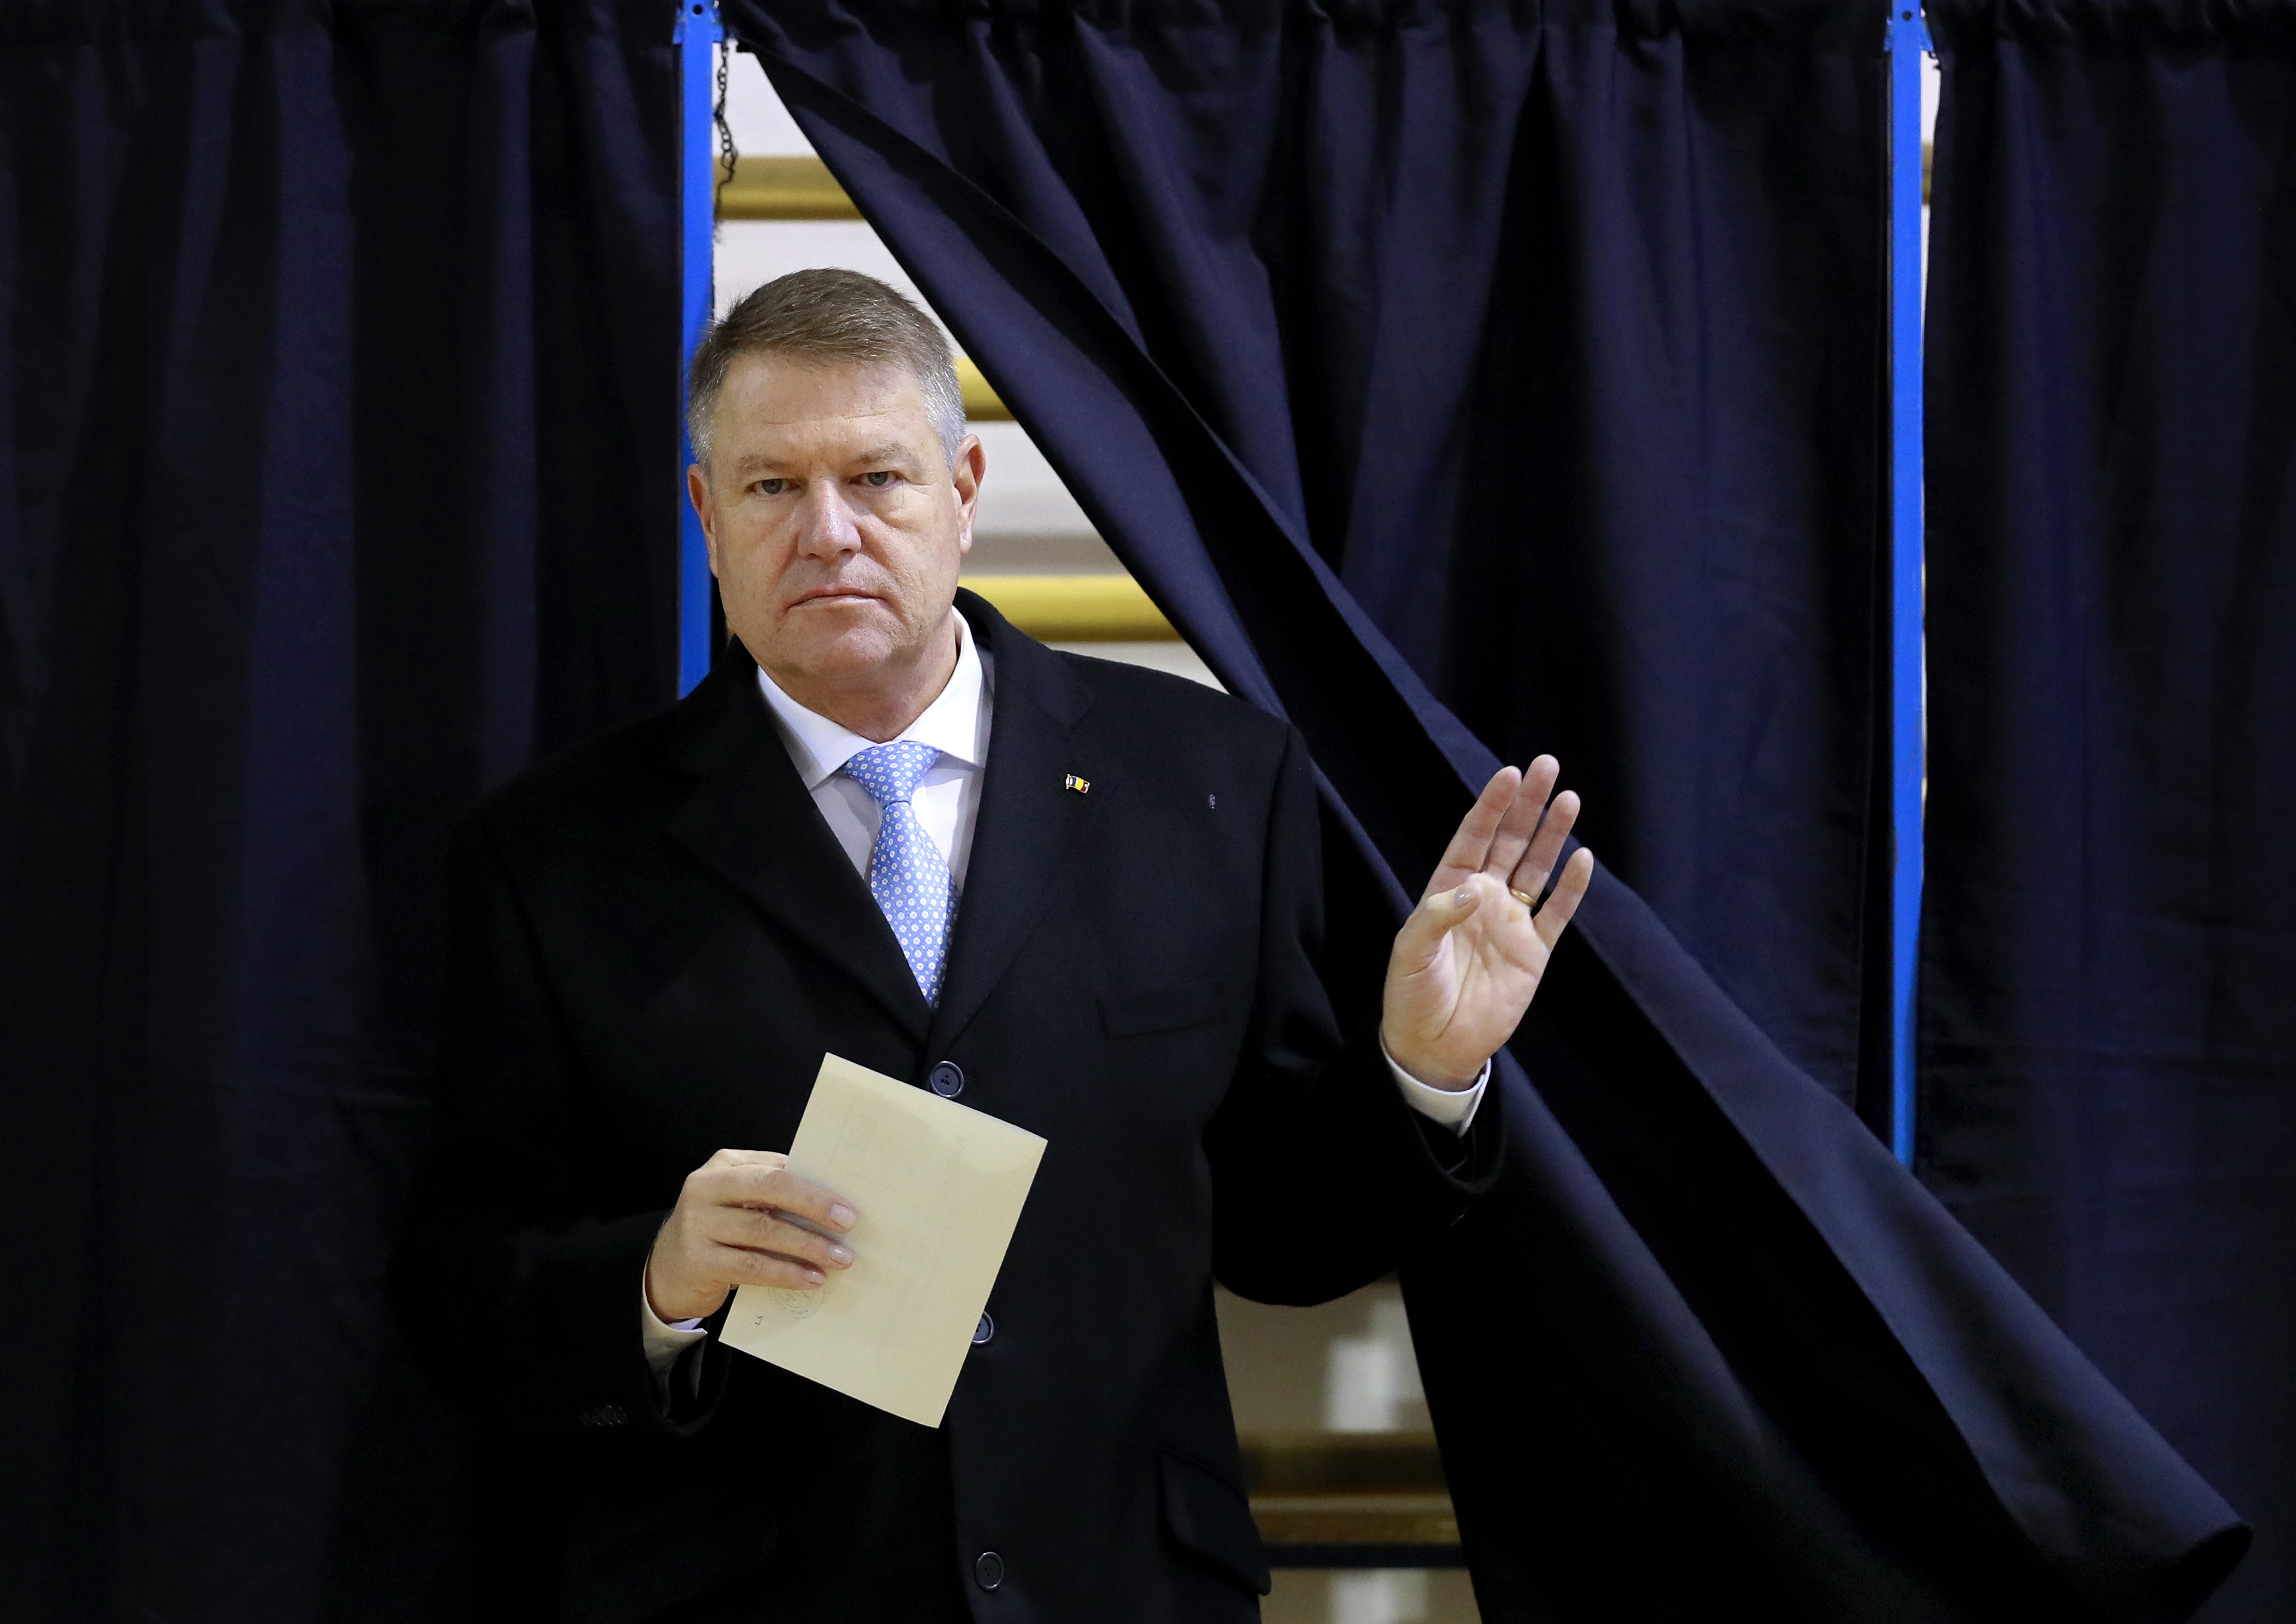 epa08021416 Romanian President Klaus Iohannis exits the voting booth to cast his ballot at a polling station during the presidential elections runoff in Bucharest, Romania, 24 November 2019. Iohannis is running for a second mandate, facing former prime minister Viorica Dancila in the second round of presidential elections.  EPA/ROBERT GHEMENT